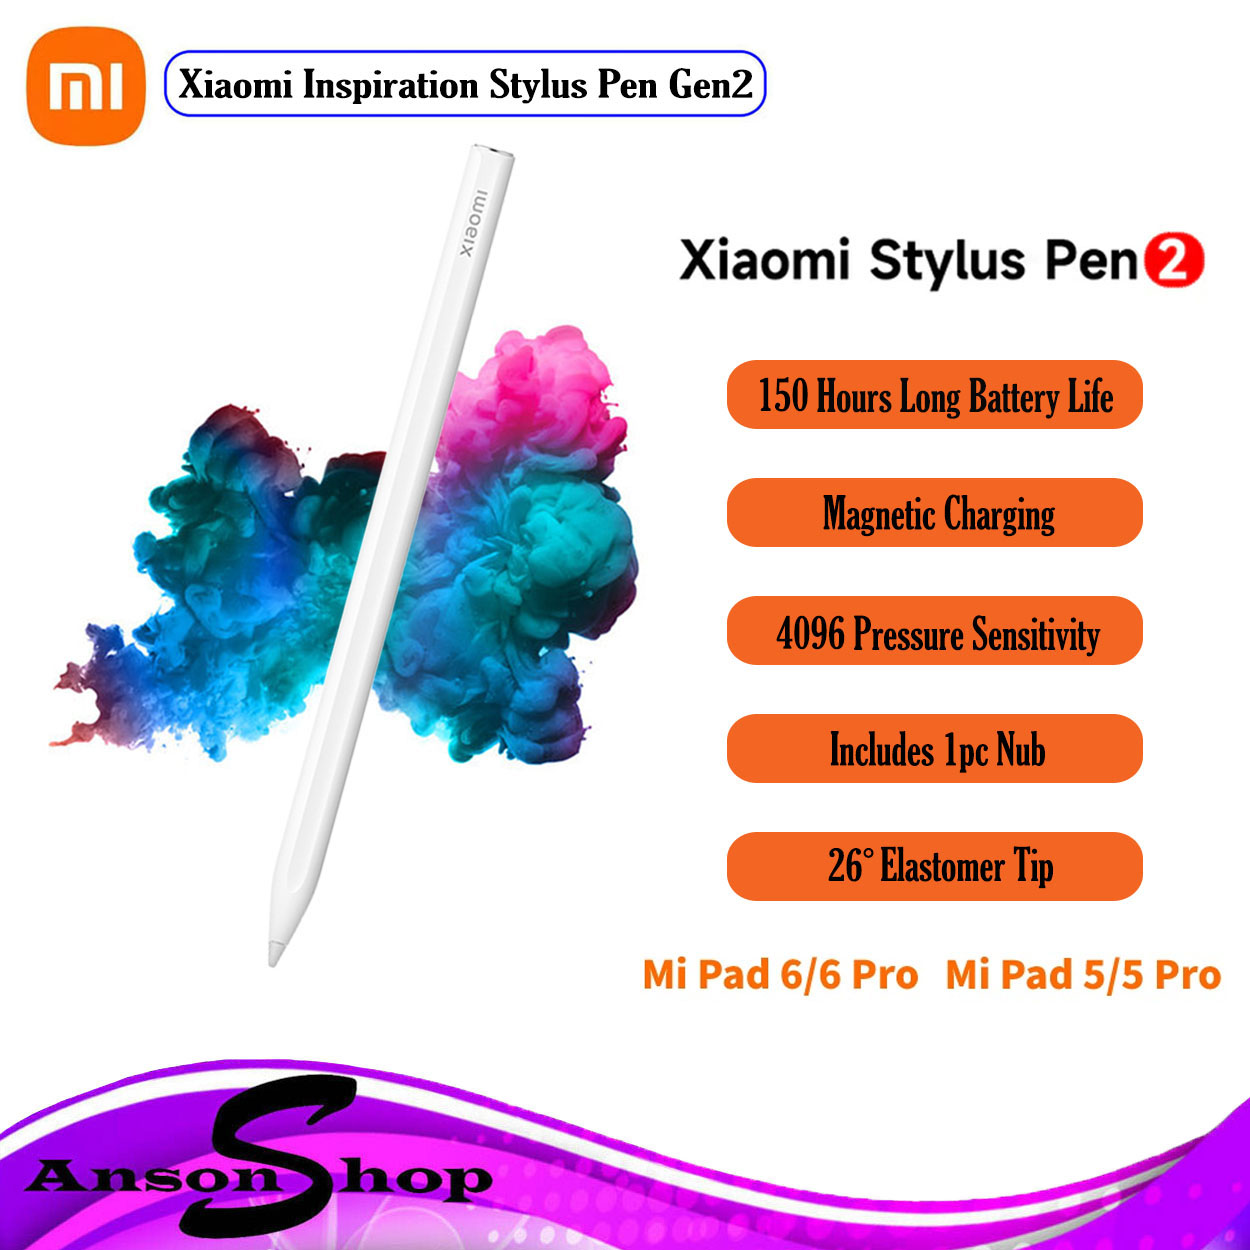 Xiaomi Smart Pen 2nd Generation: Does it work with XIAOMI PAD 5? 